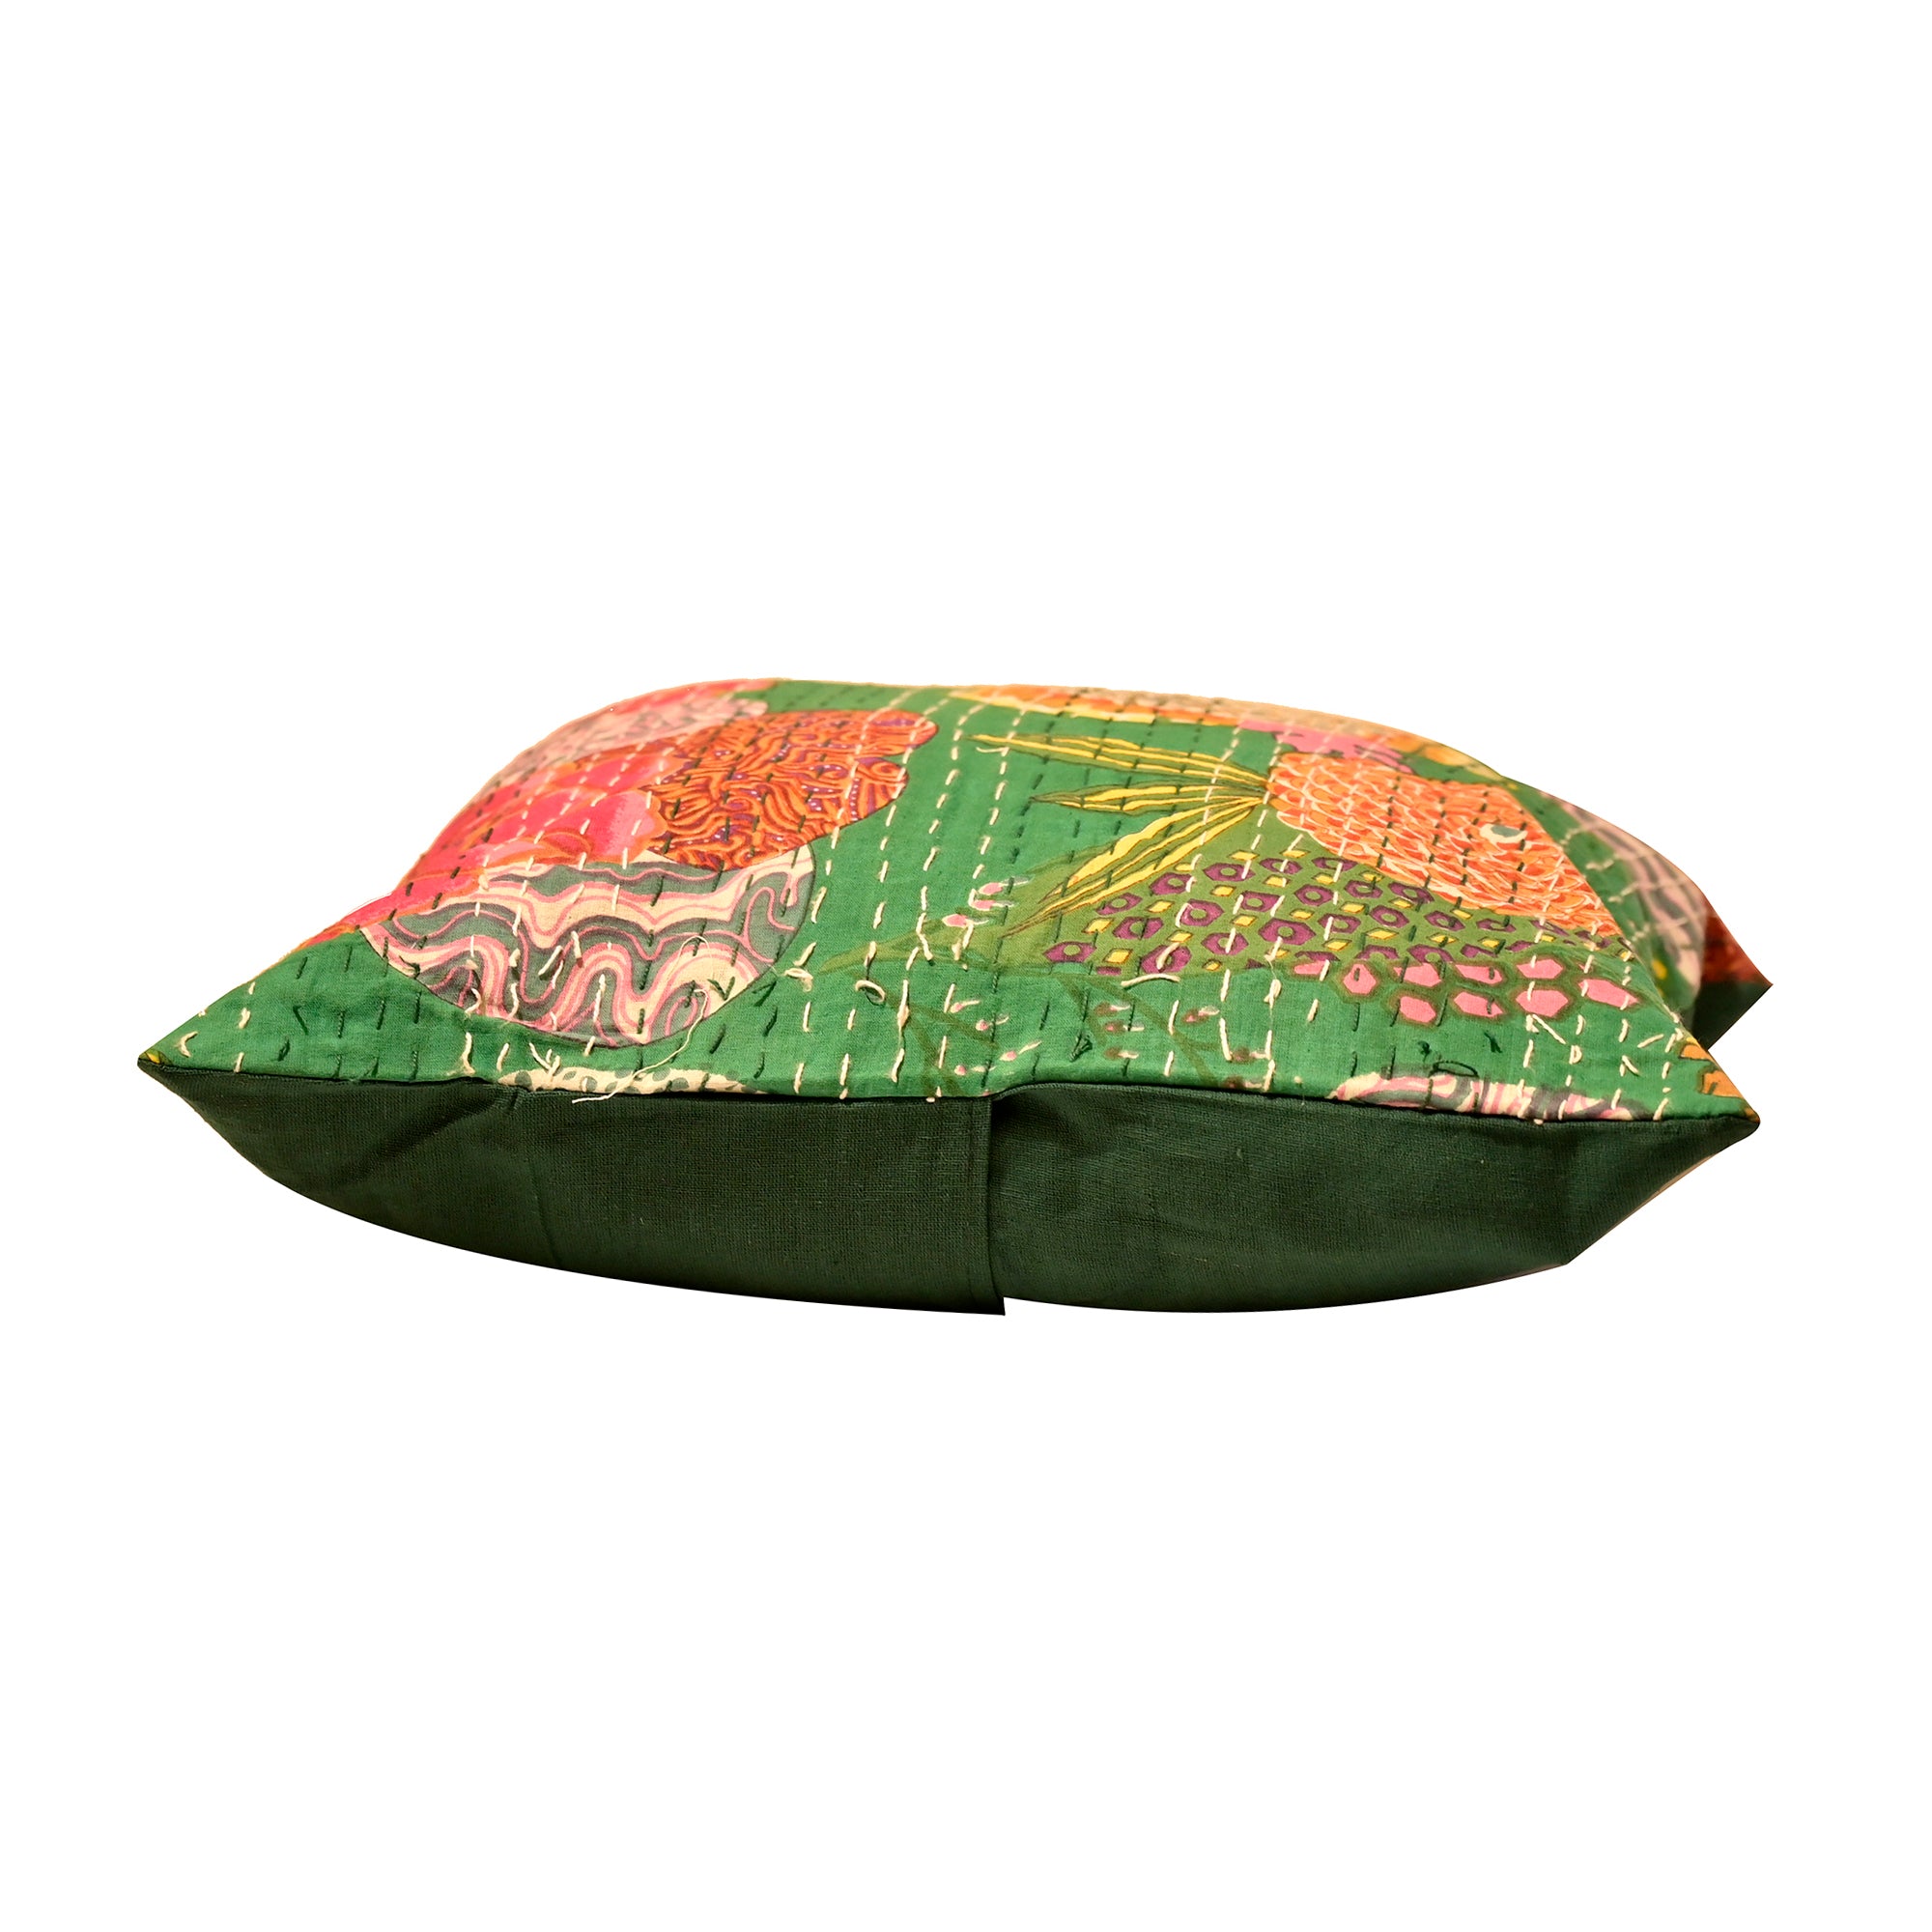 Floral Rajasthani Printed Cushion Cover set of five